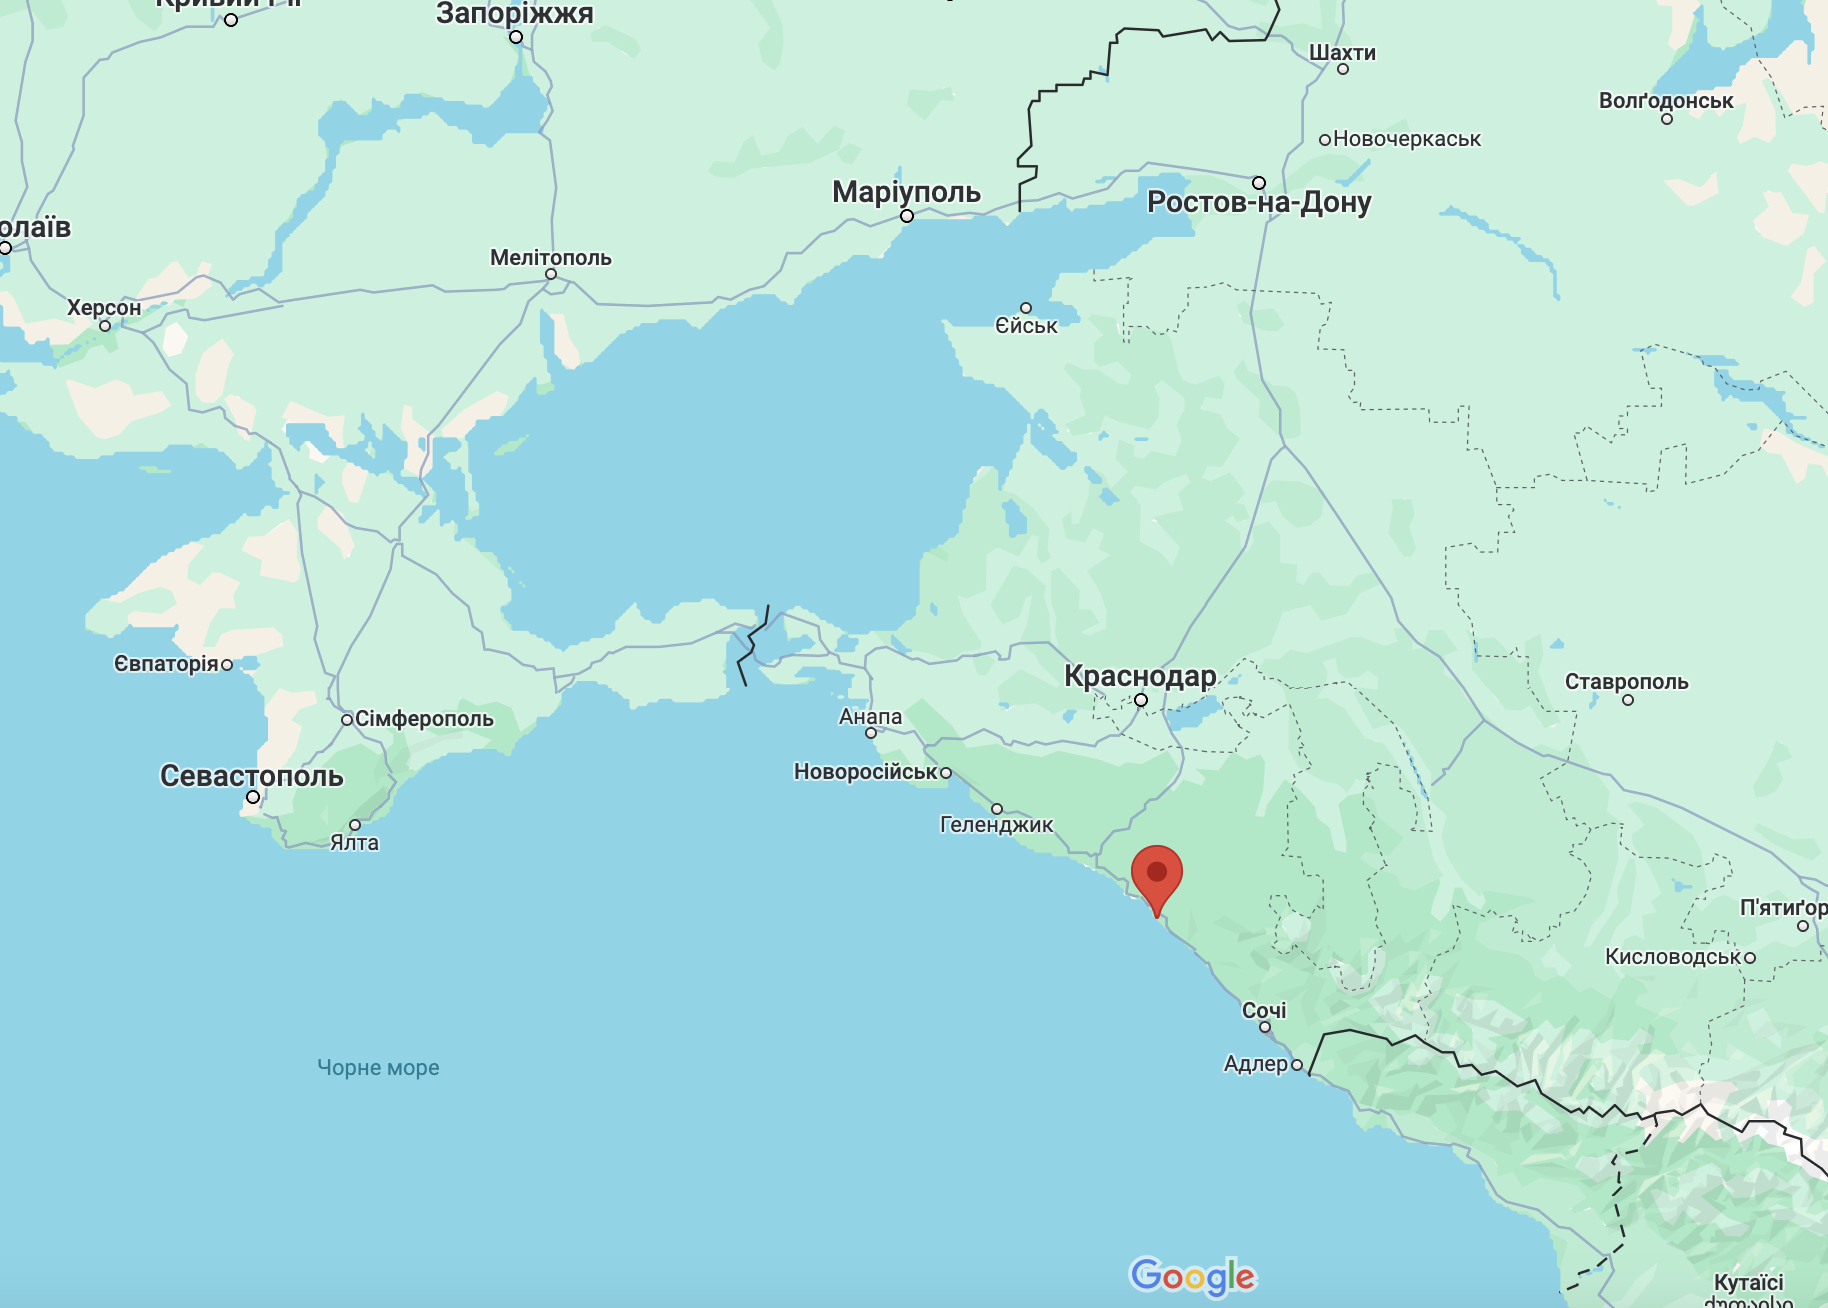 ''More surprises to come'': Security Service of Ukraine confirmed the attack on the oil refinery in Tuapse and revealed details